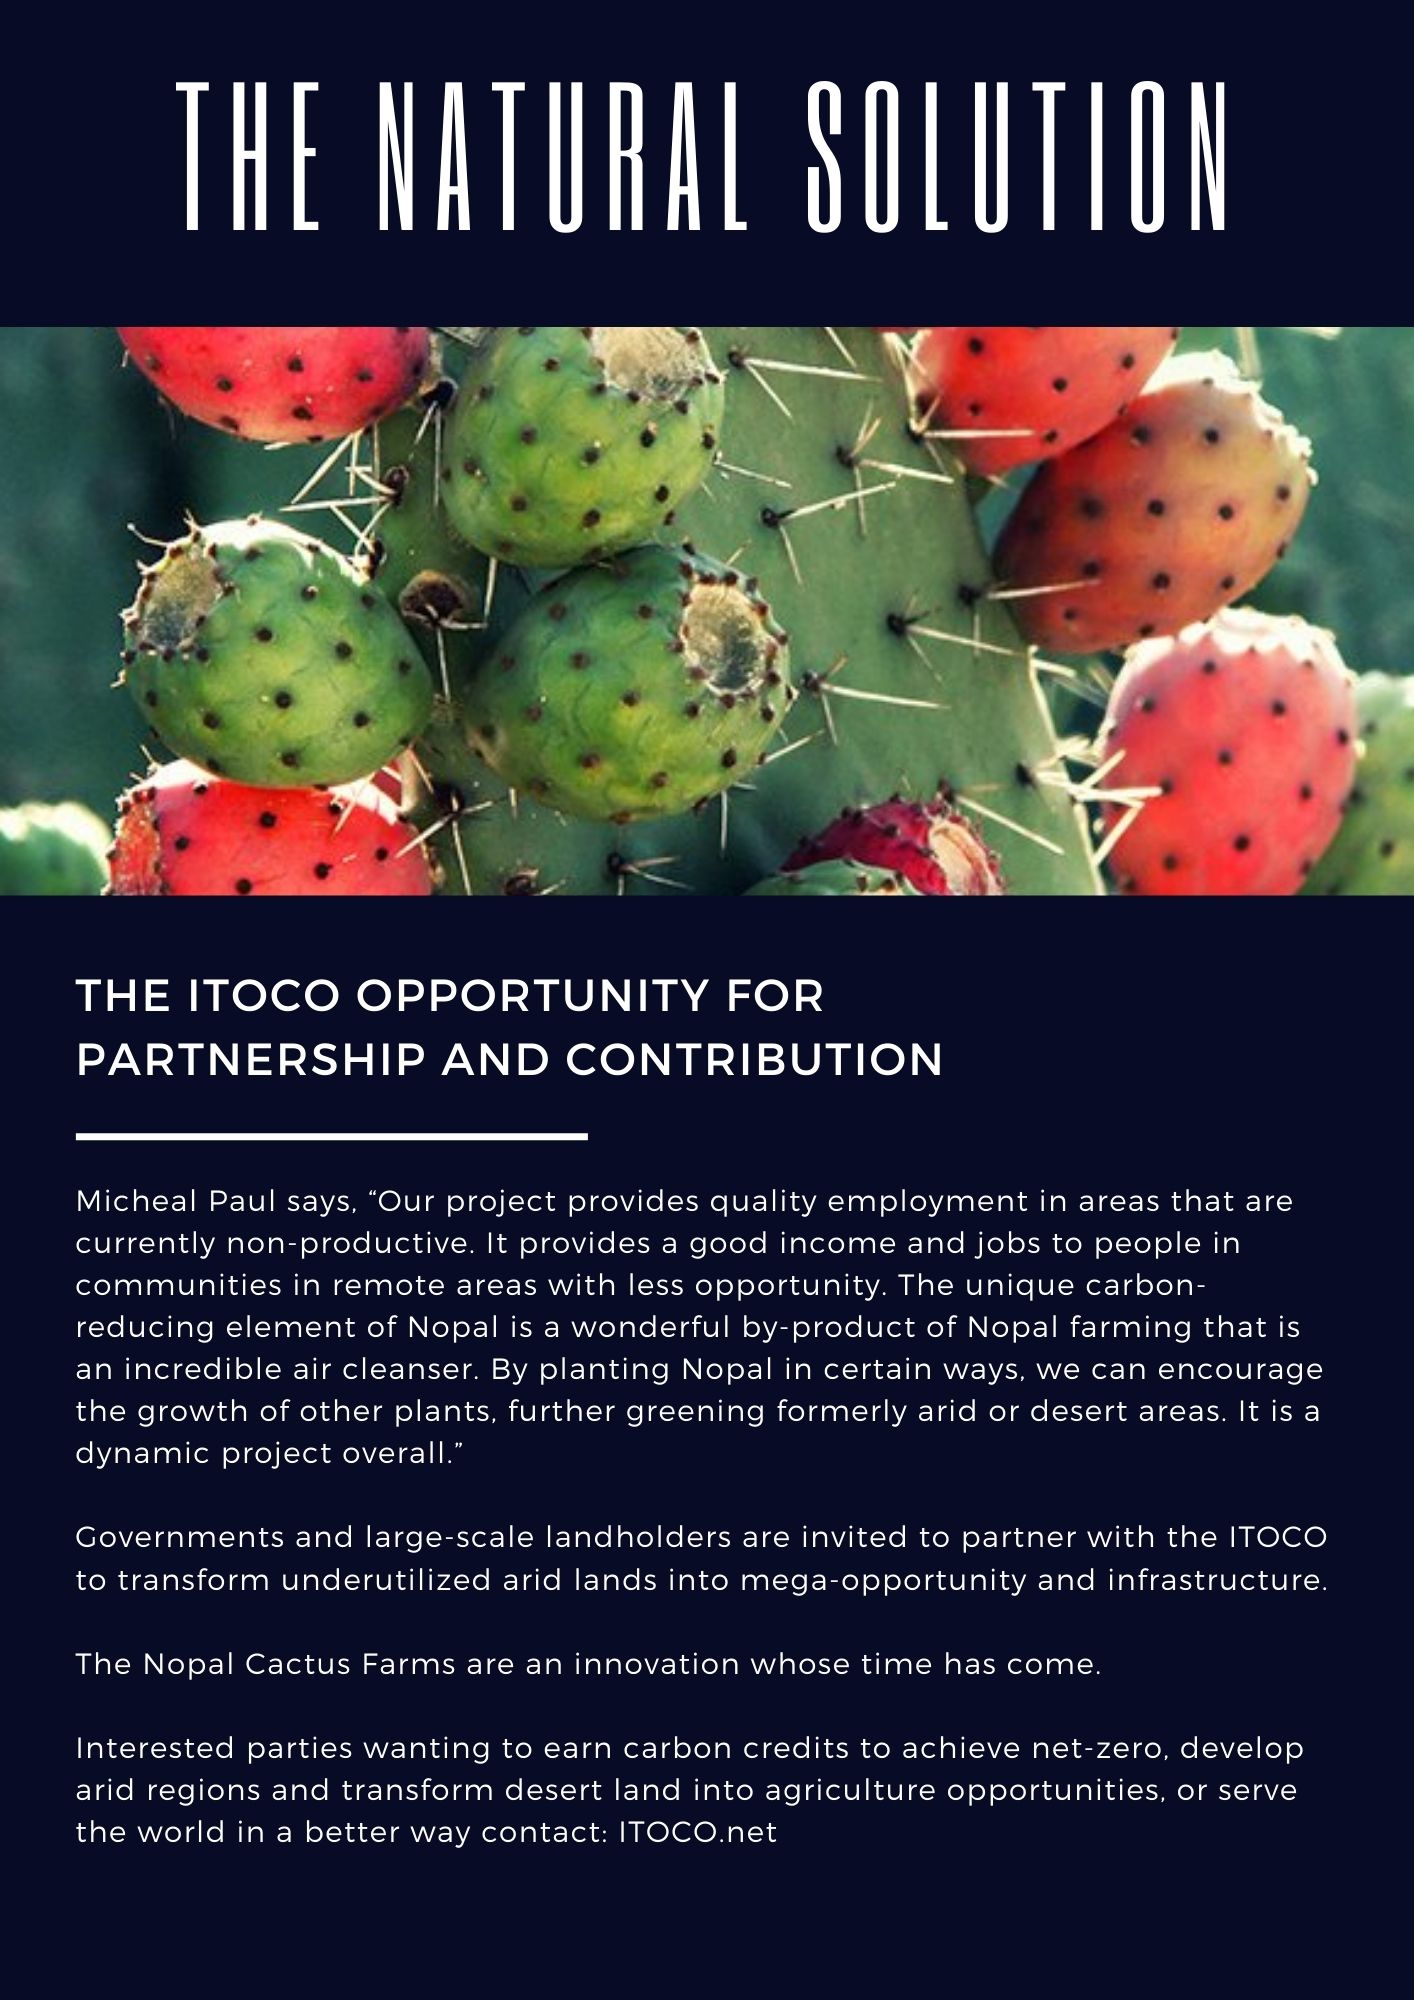 Climate Change Effects and Their Solutions by ITOCO Cactus Farming